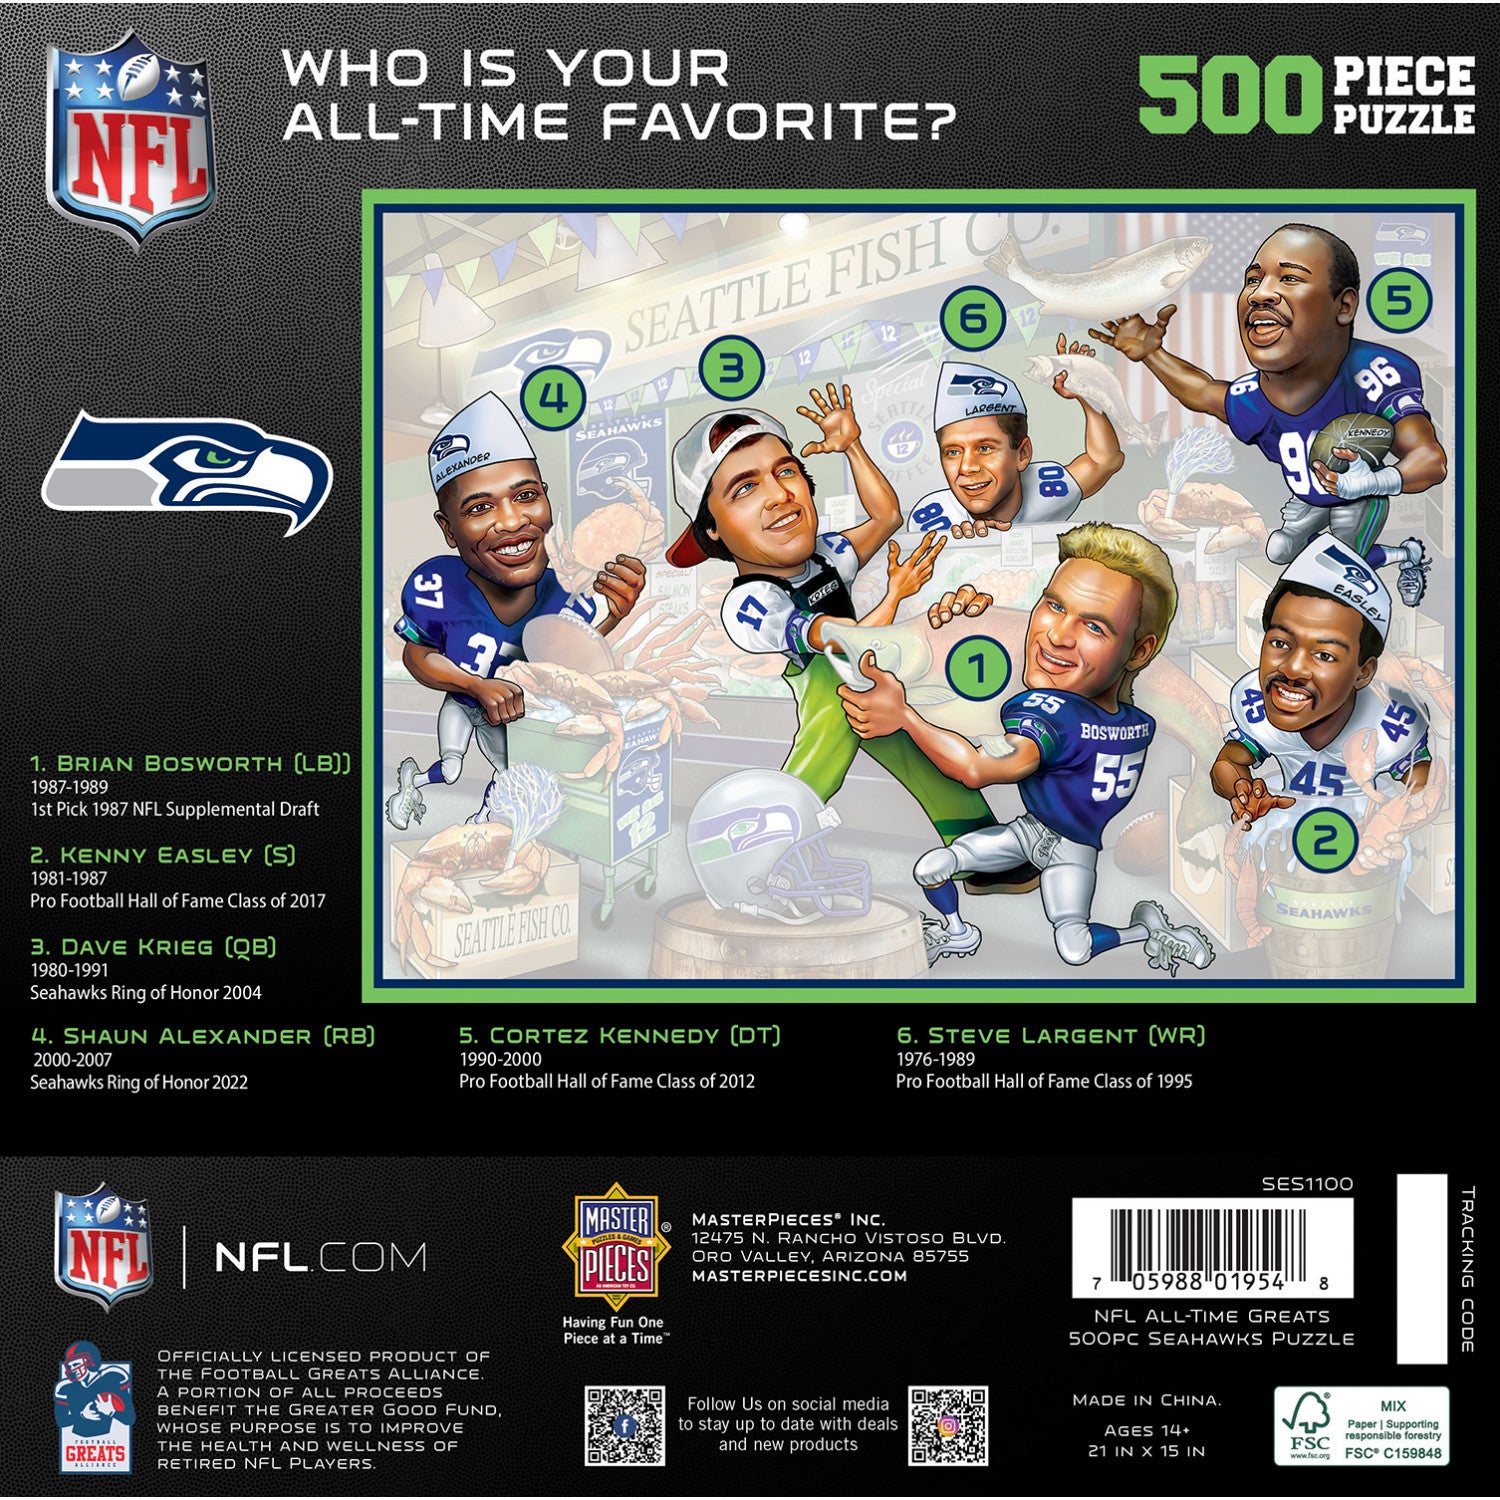 Seattle Seahawks - All Time Greats 500 Piece Jigsaw Puzzle